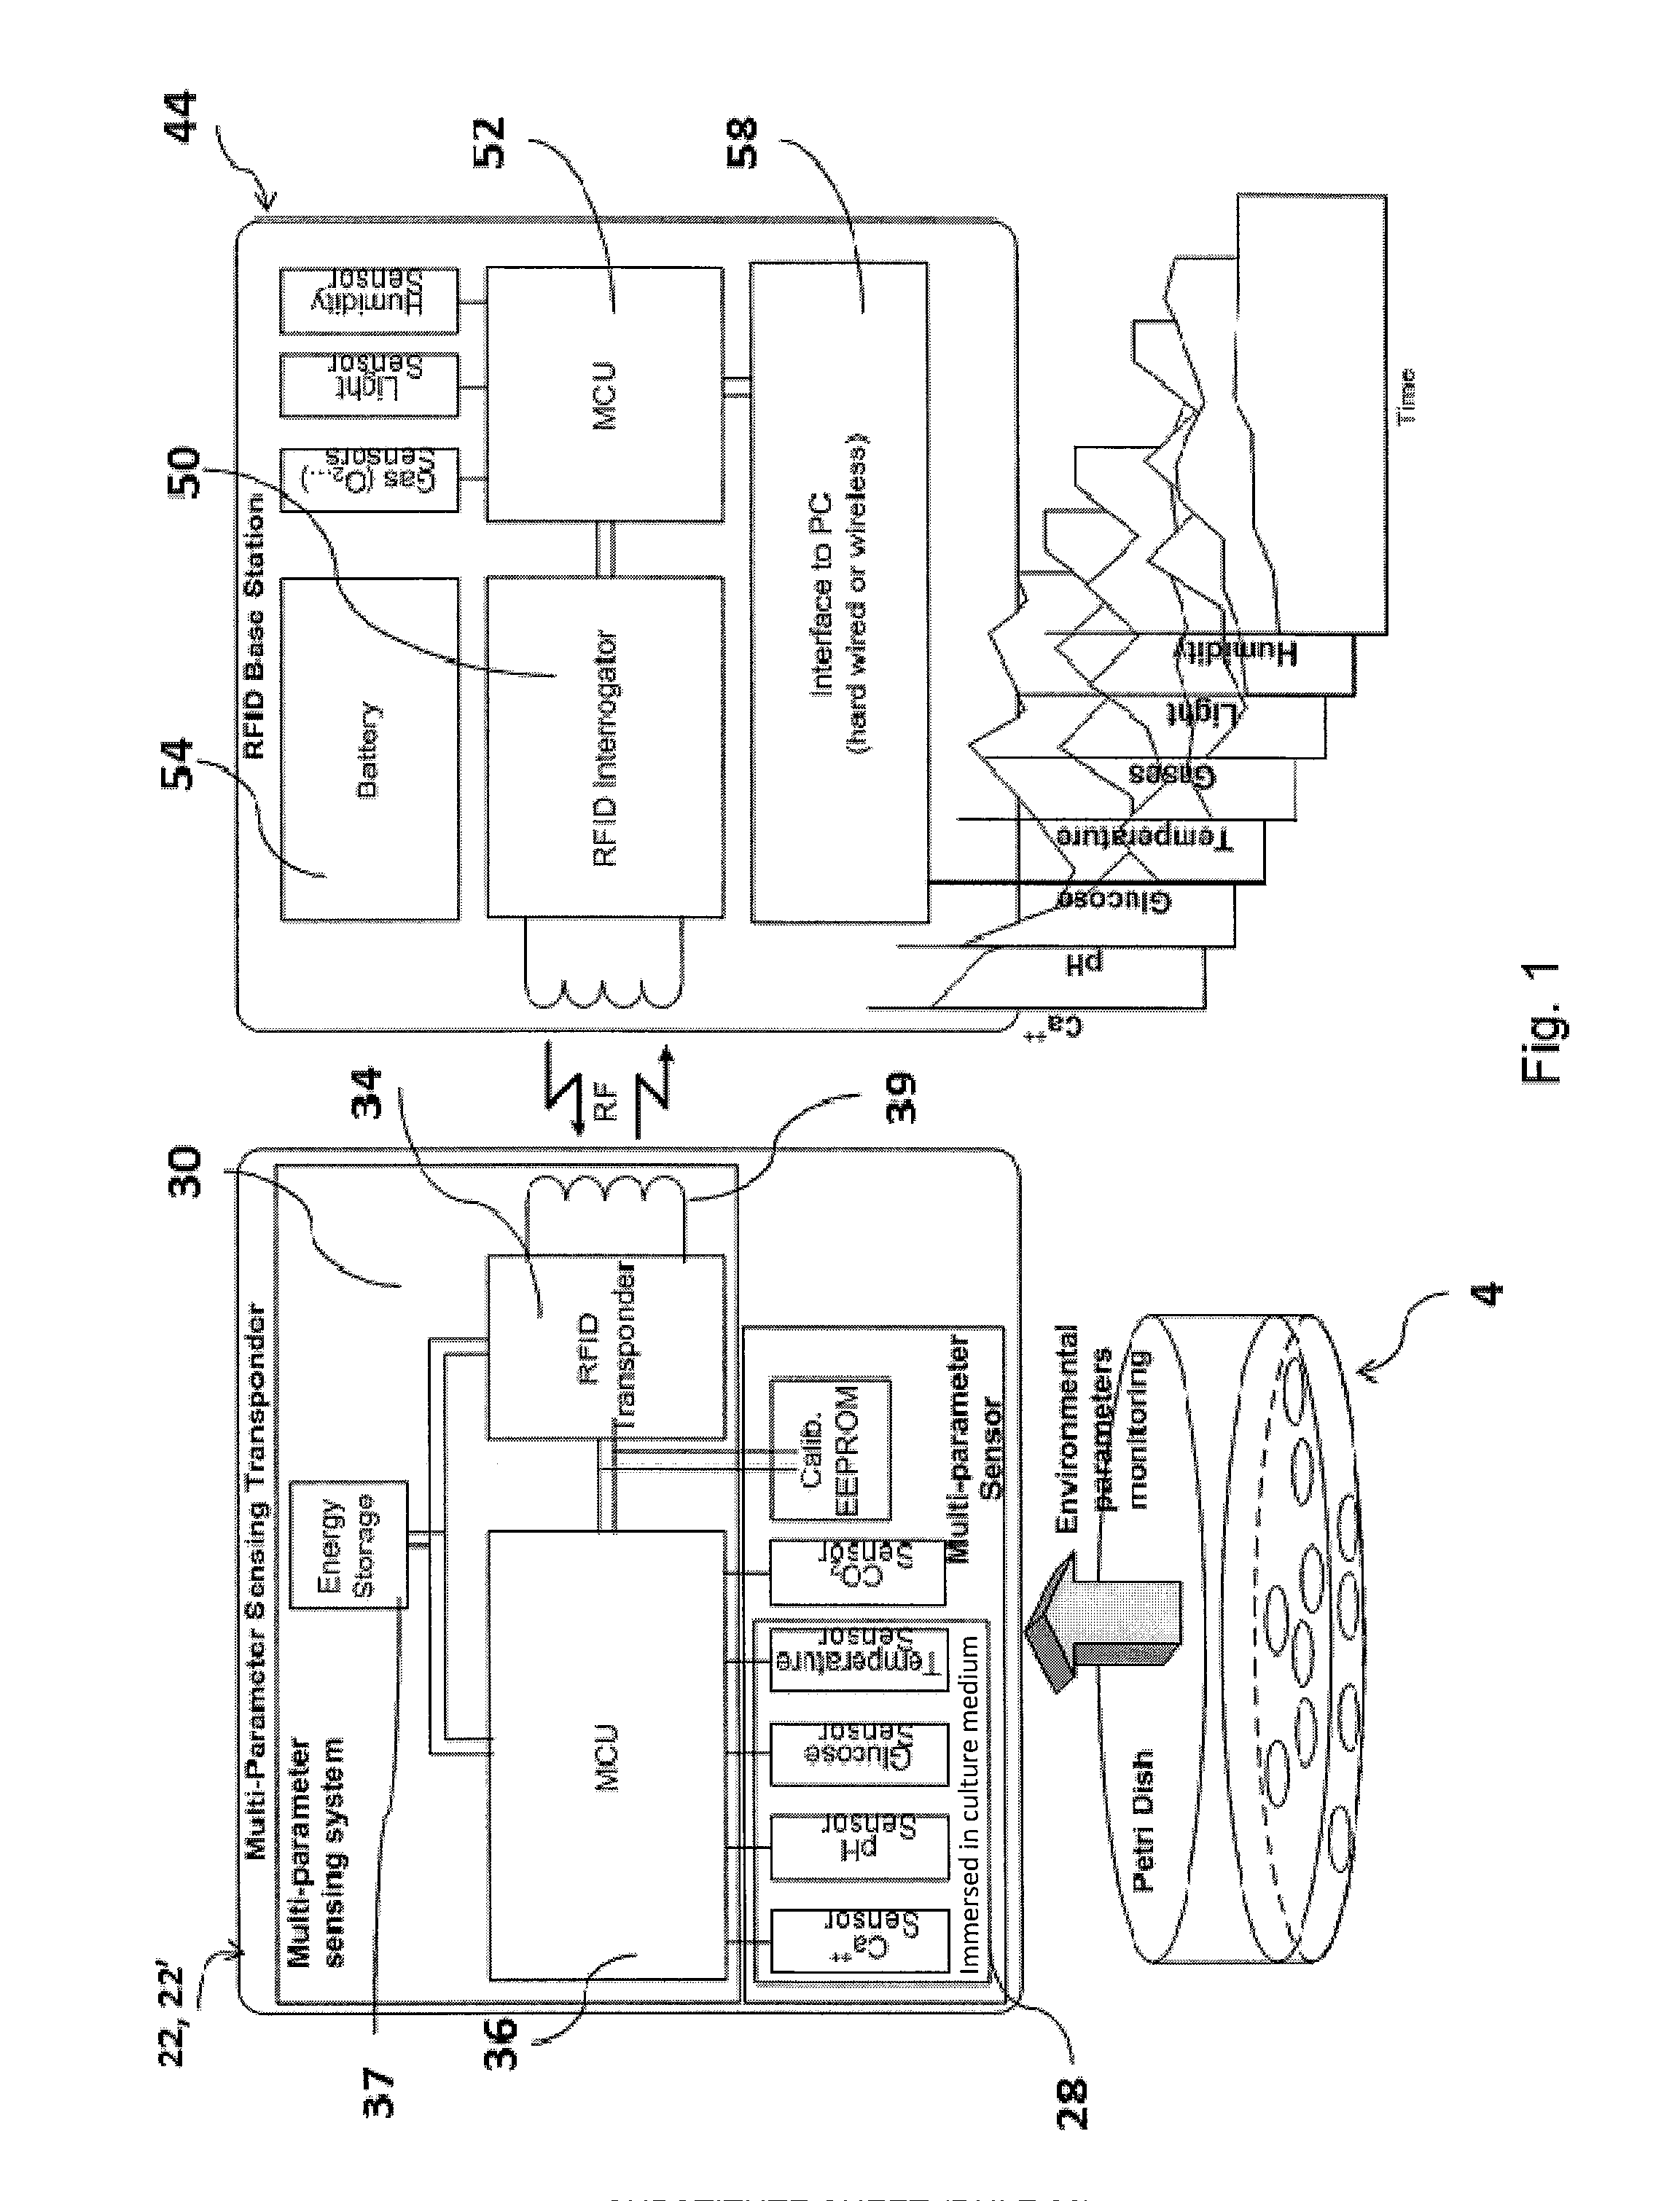 Monitoring system for cell culture